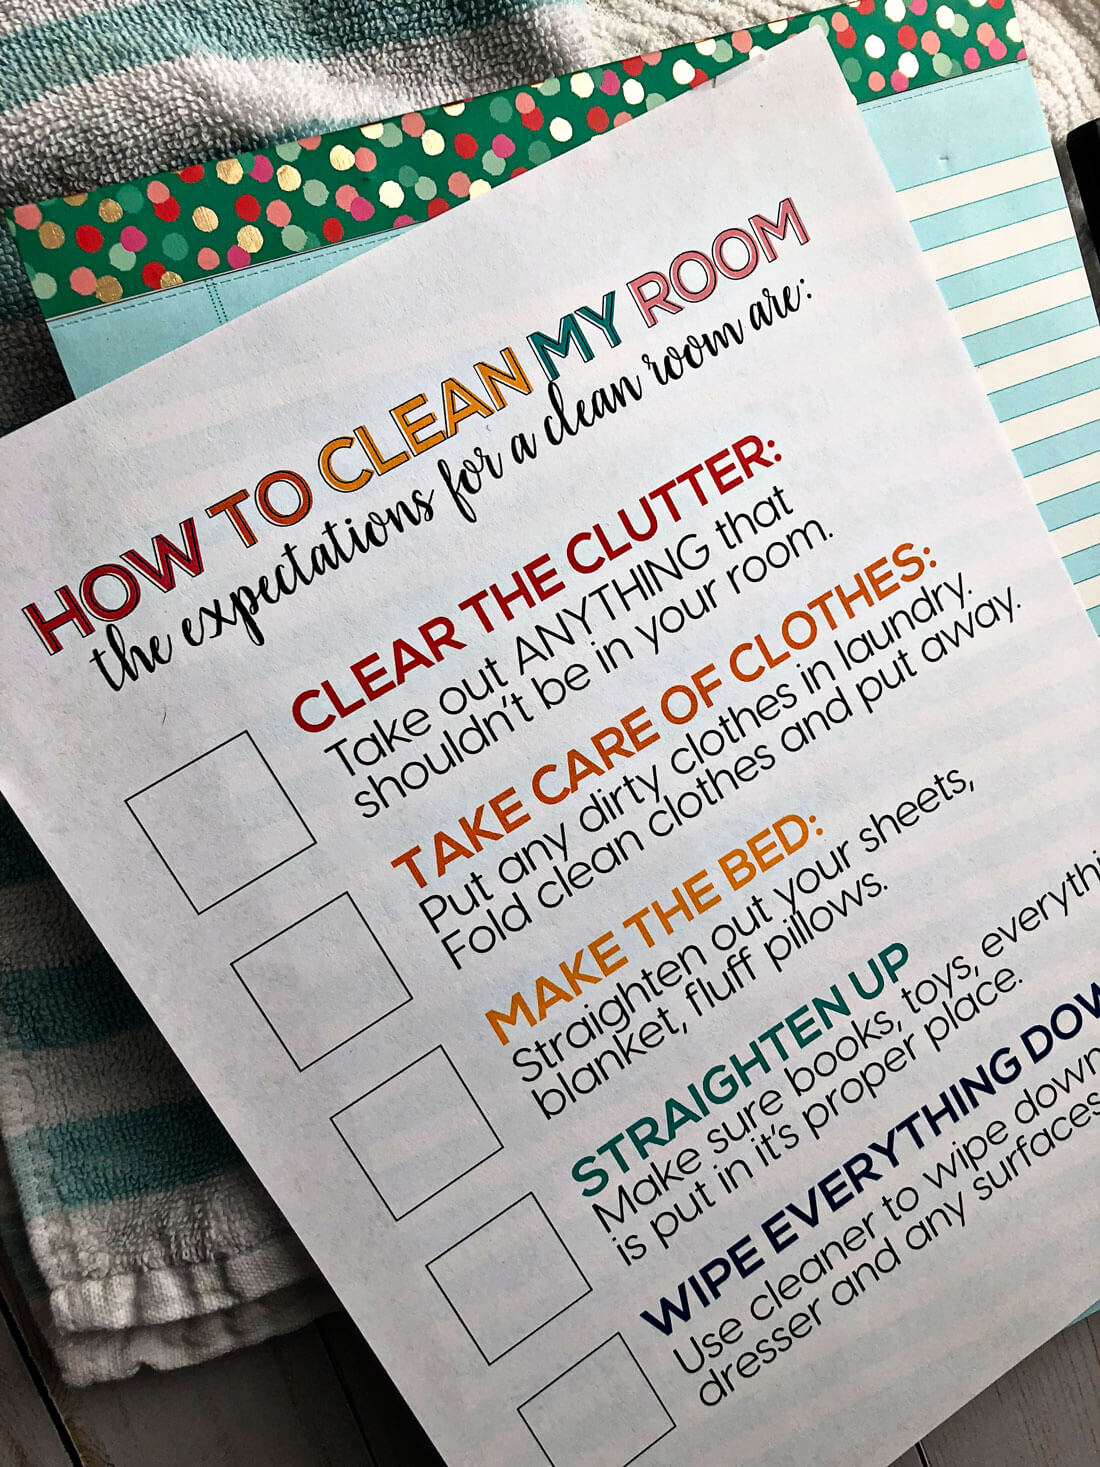 How to Clean Your Room - printable for kids to set expectations of how to clean their room